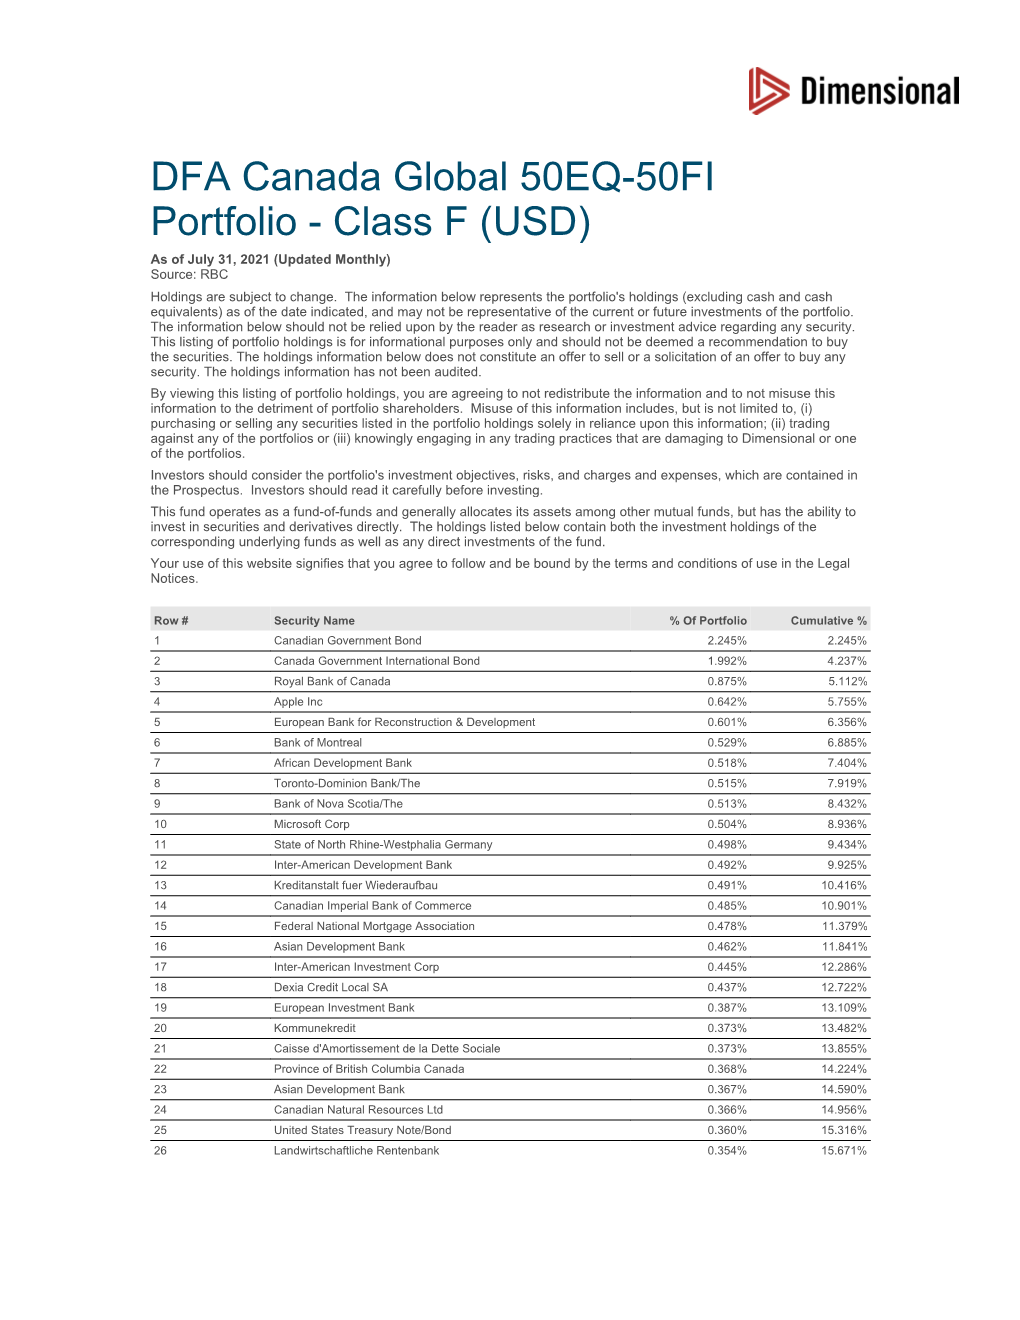 DFA Canada Global 50EQ-50FI Portfolio - Class F (USD) As of July 31, 2021 (Updated Monthly) Source: RBC Holdings Are Subject to Change